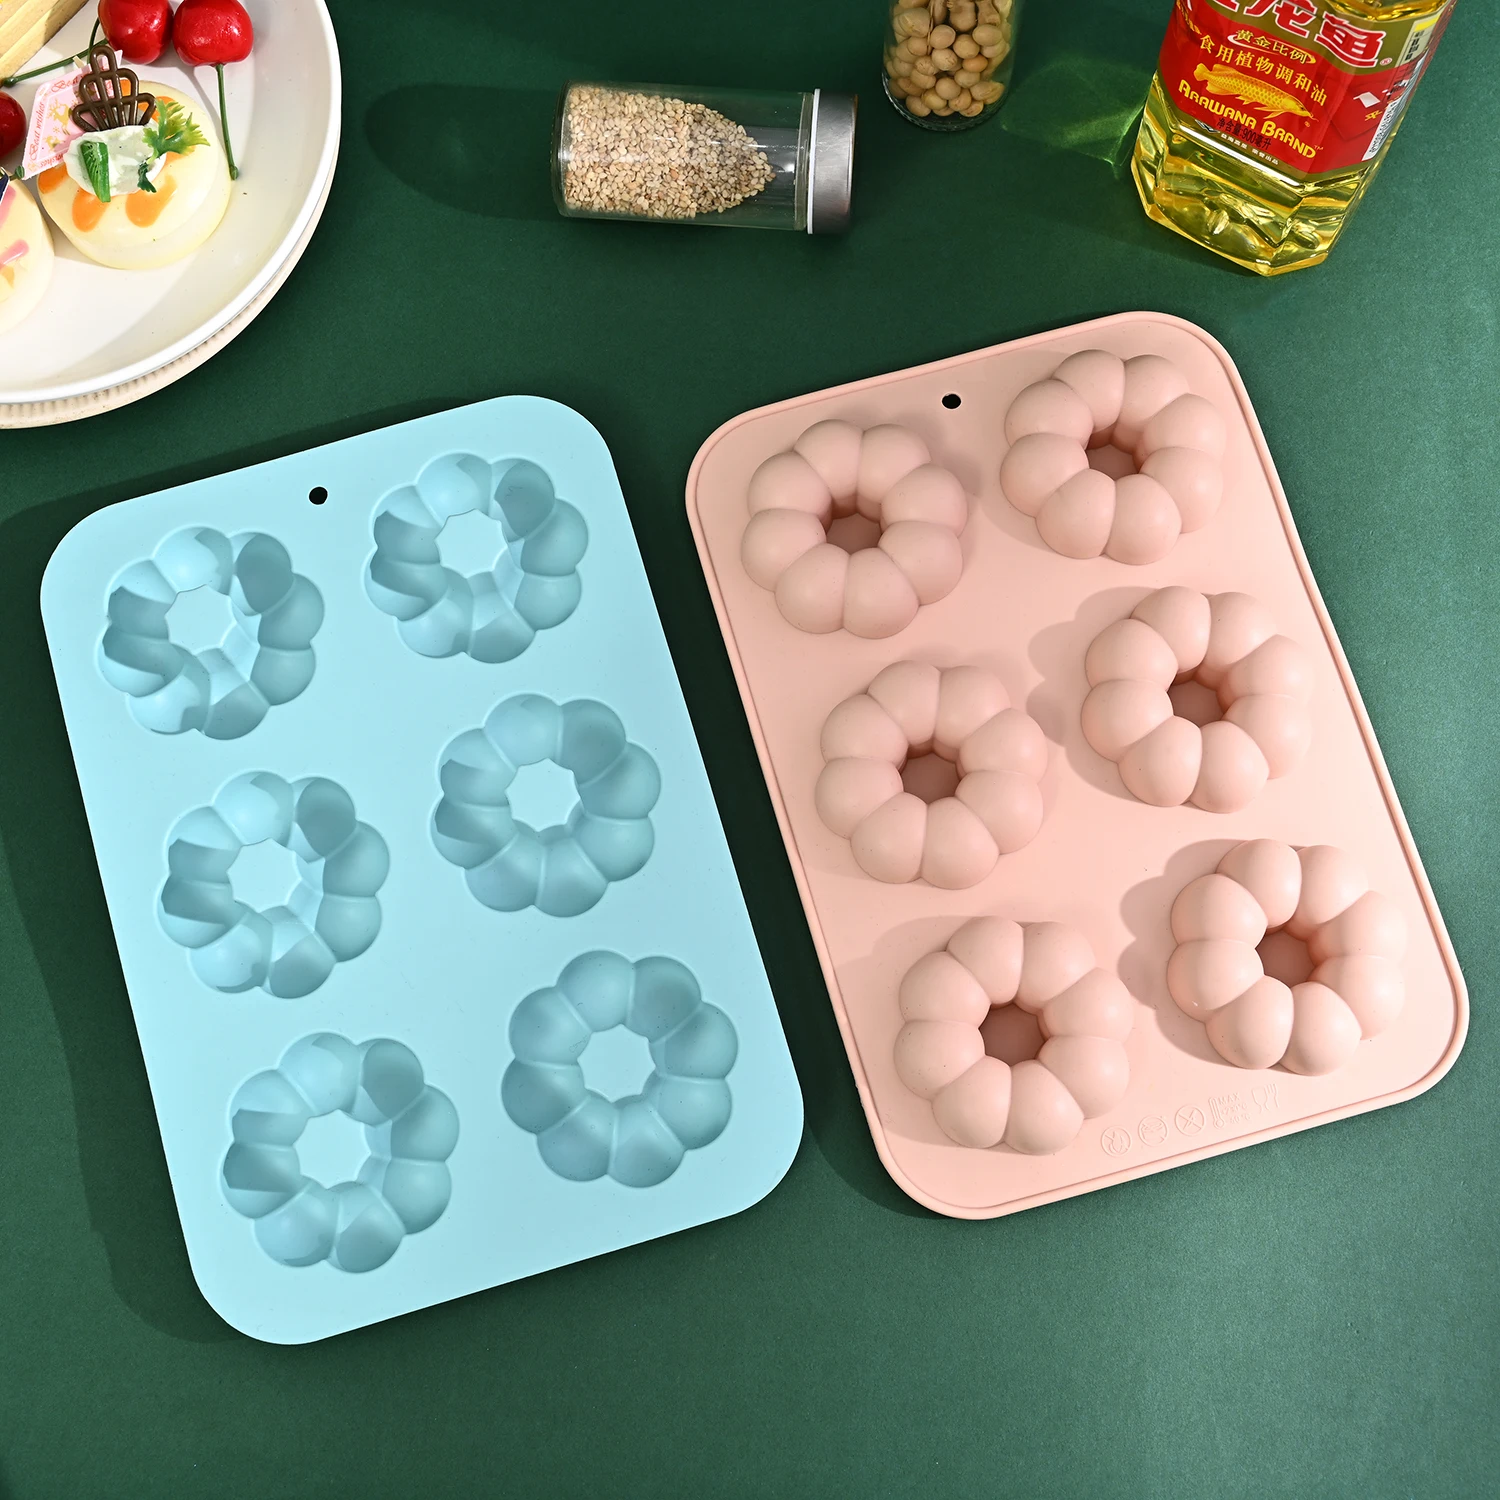 6 Cavity Non Stick Biscuit Cake Mould Reusable Chocolate Making Tray Silicone Doughnut Pan For Baking Pan Para Hacer Rosquil